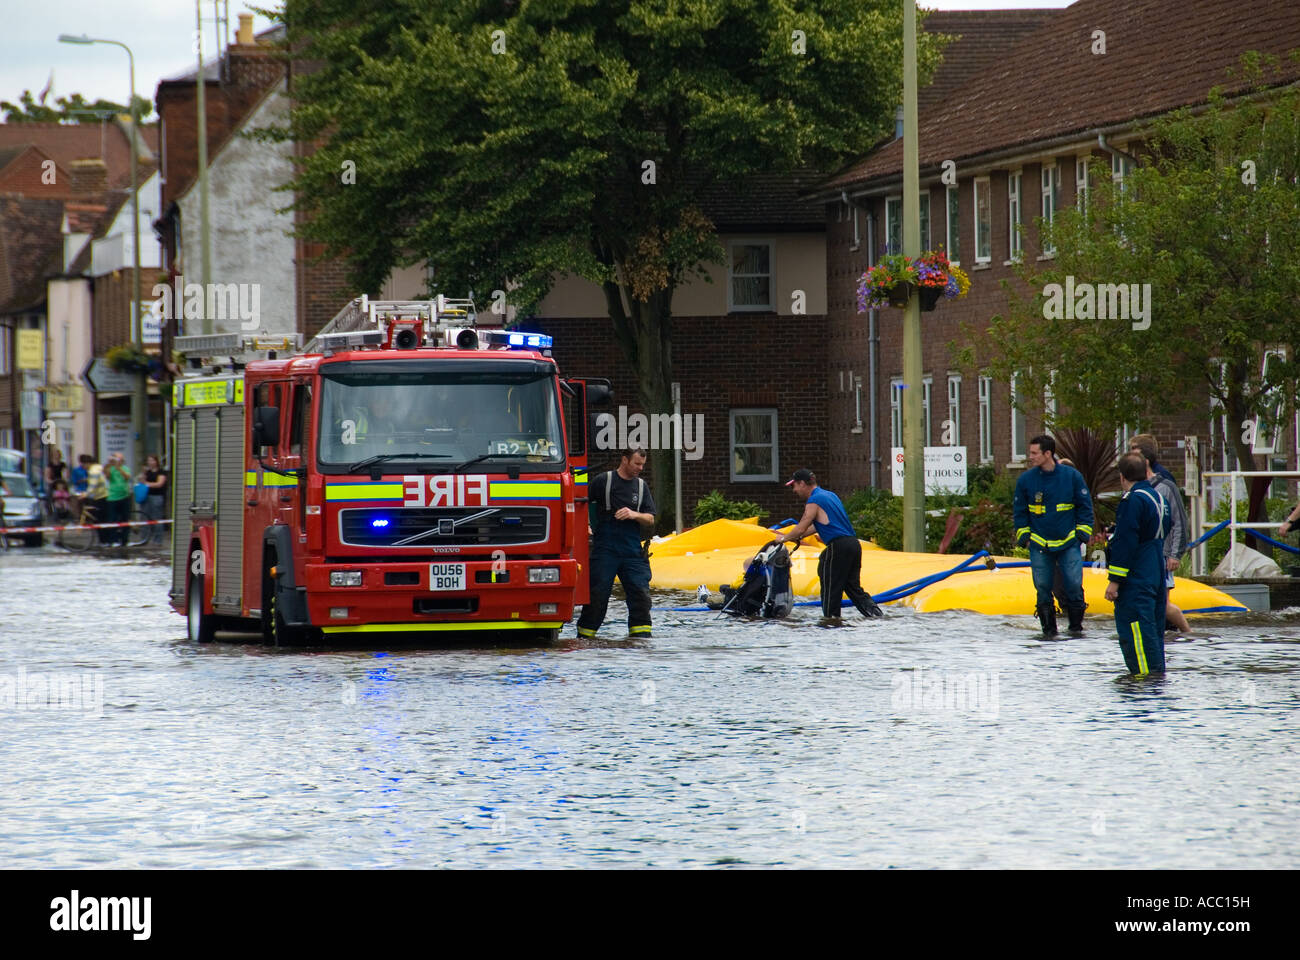 Fire Engine in Flooded Street Stock Photo